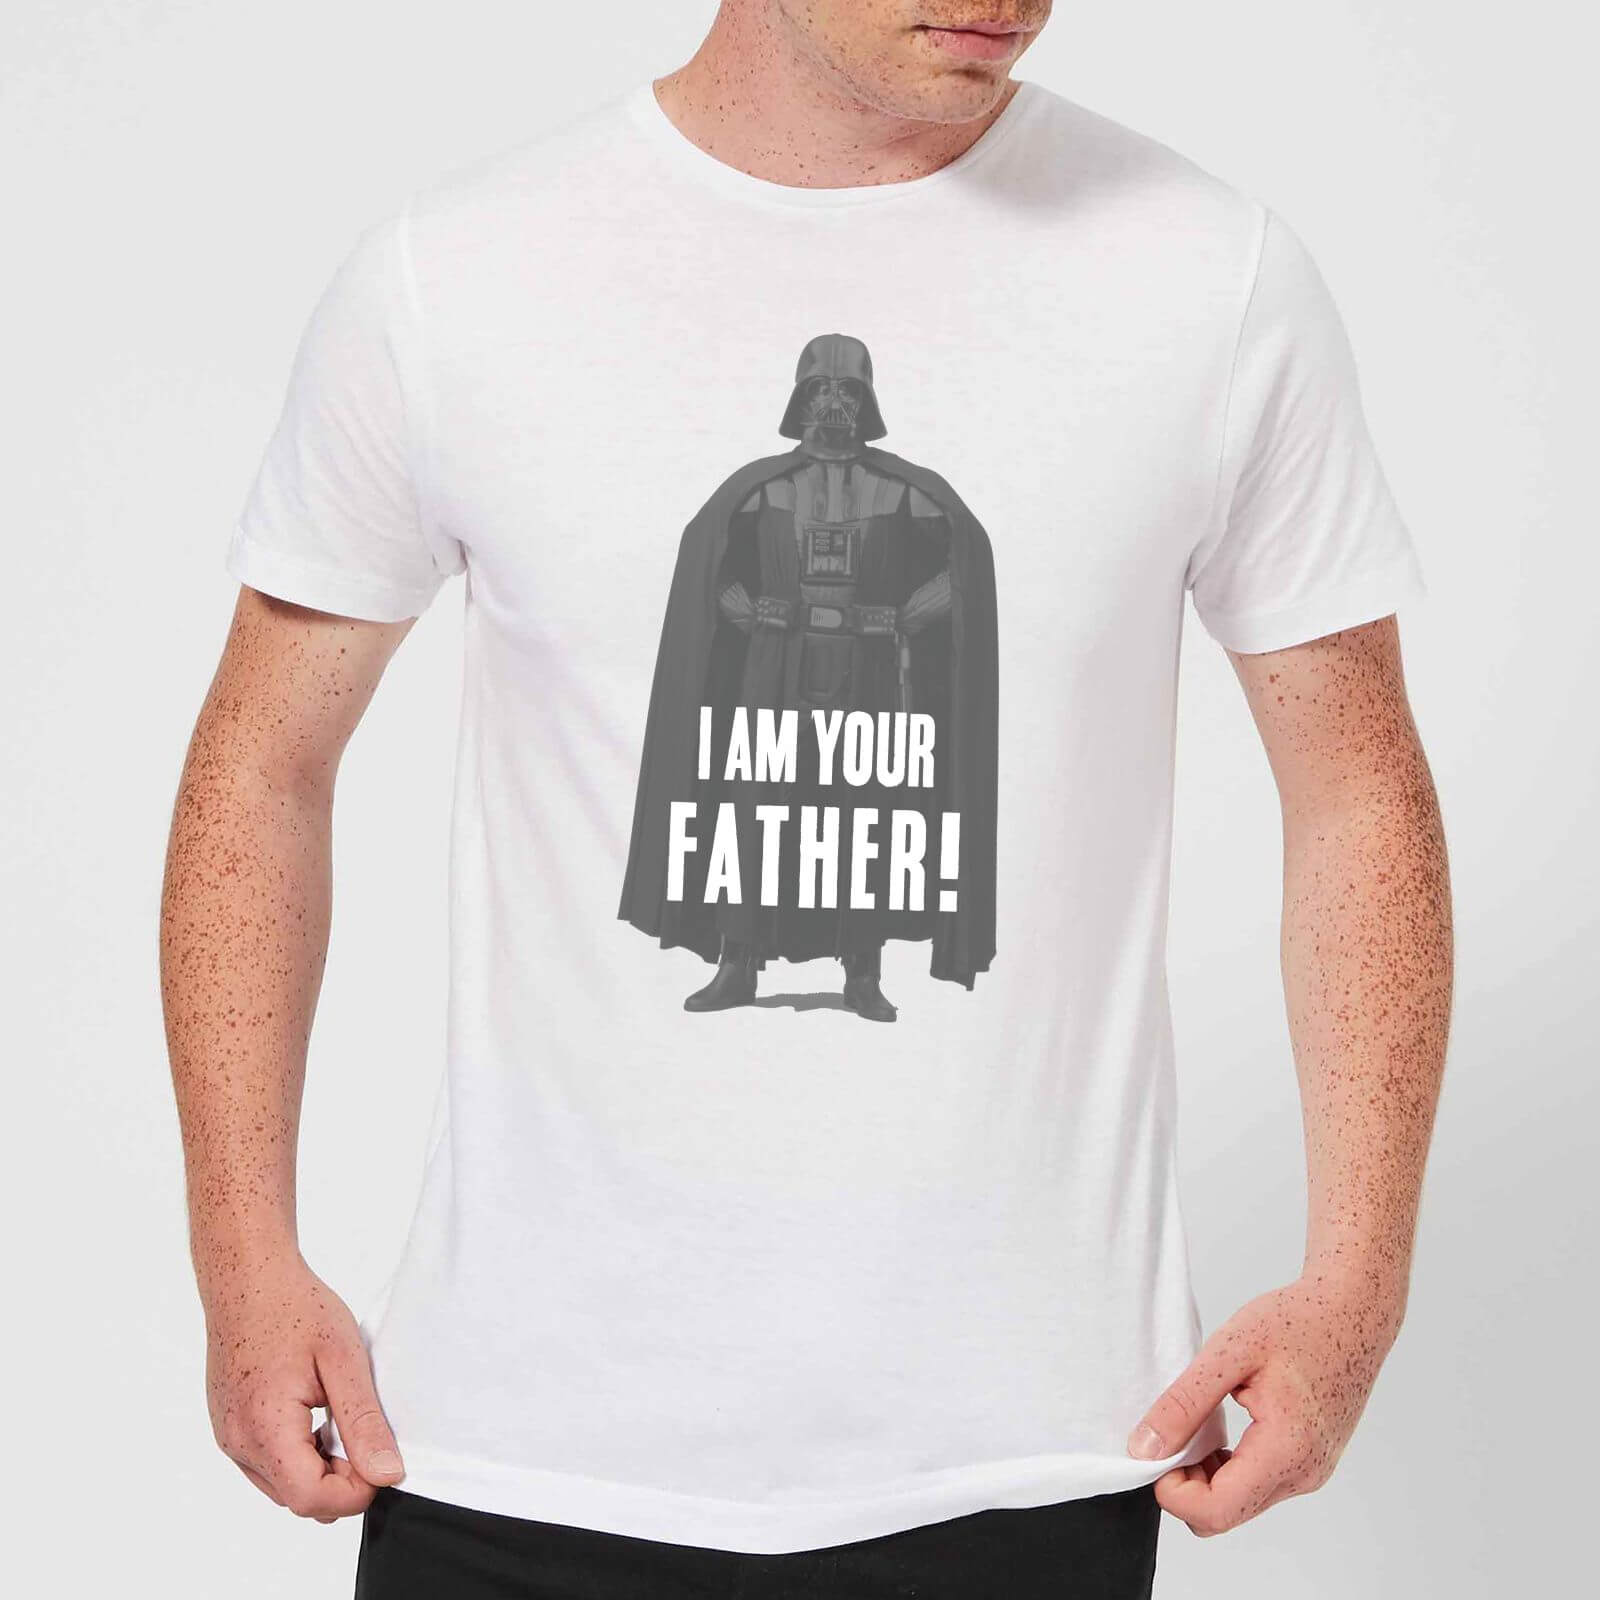 Star Wars Darth Vader I Am Your Father Pose Men's T-Shirt - White - 3XL - White